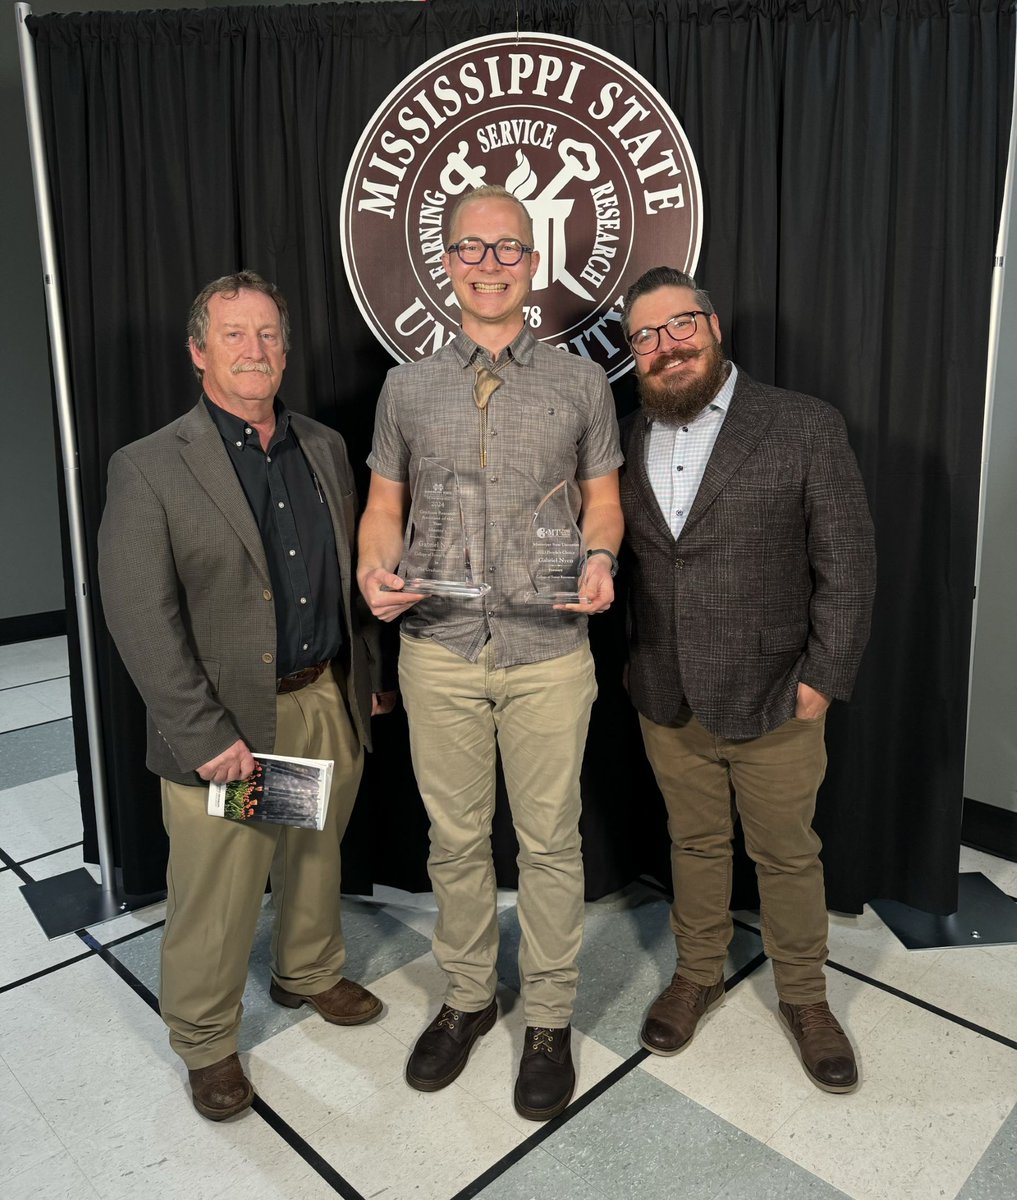 🎉Gabe Nyen, a M.S. student in our Ecological Silviculture Lab was recognized as Mississippi State University’s Graduate Research Assistant of the Year!